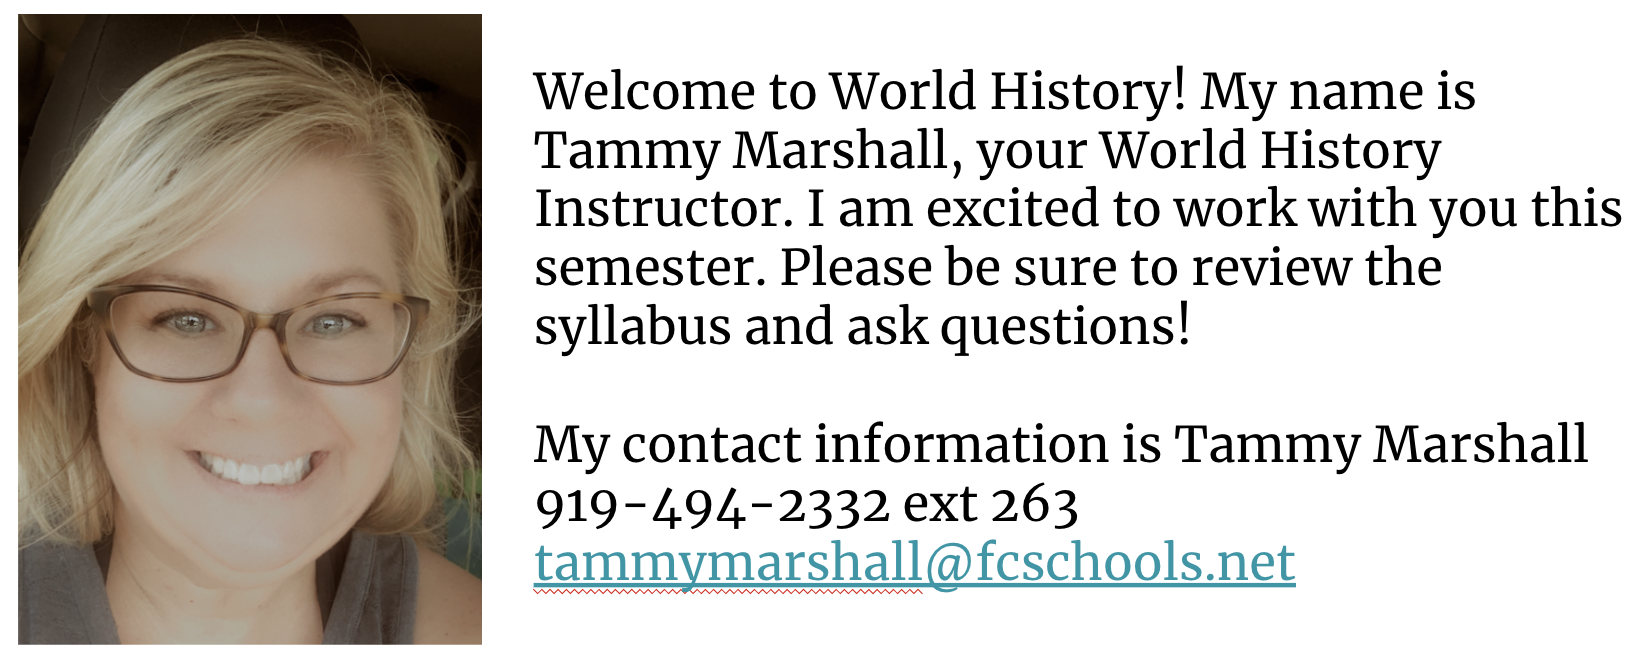 Welcome information and teacher contact info